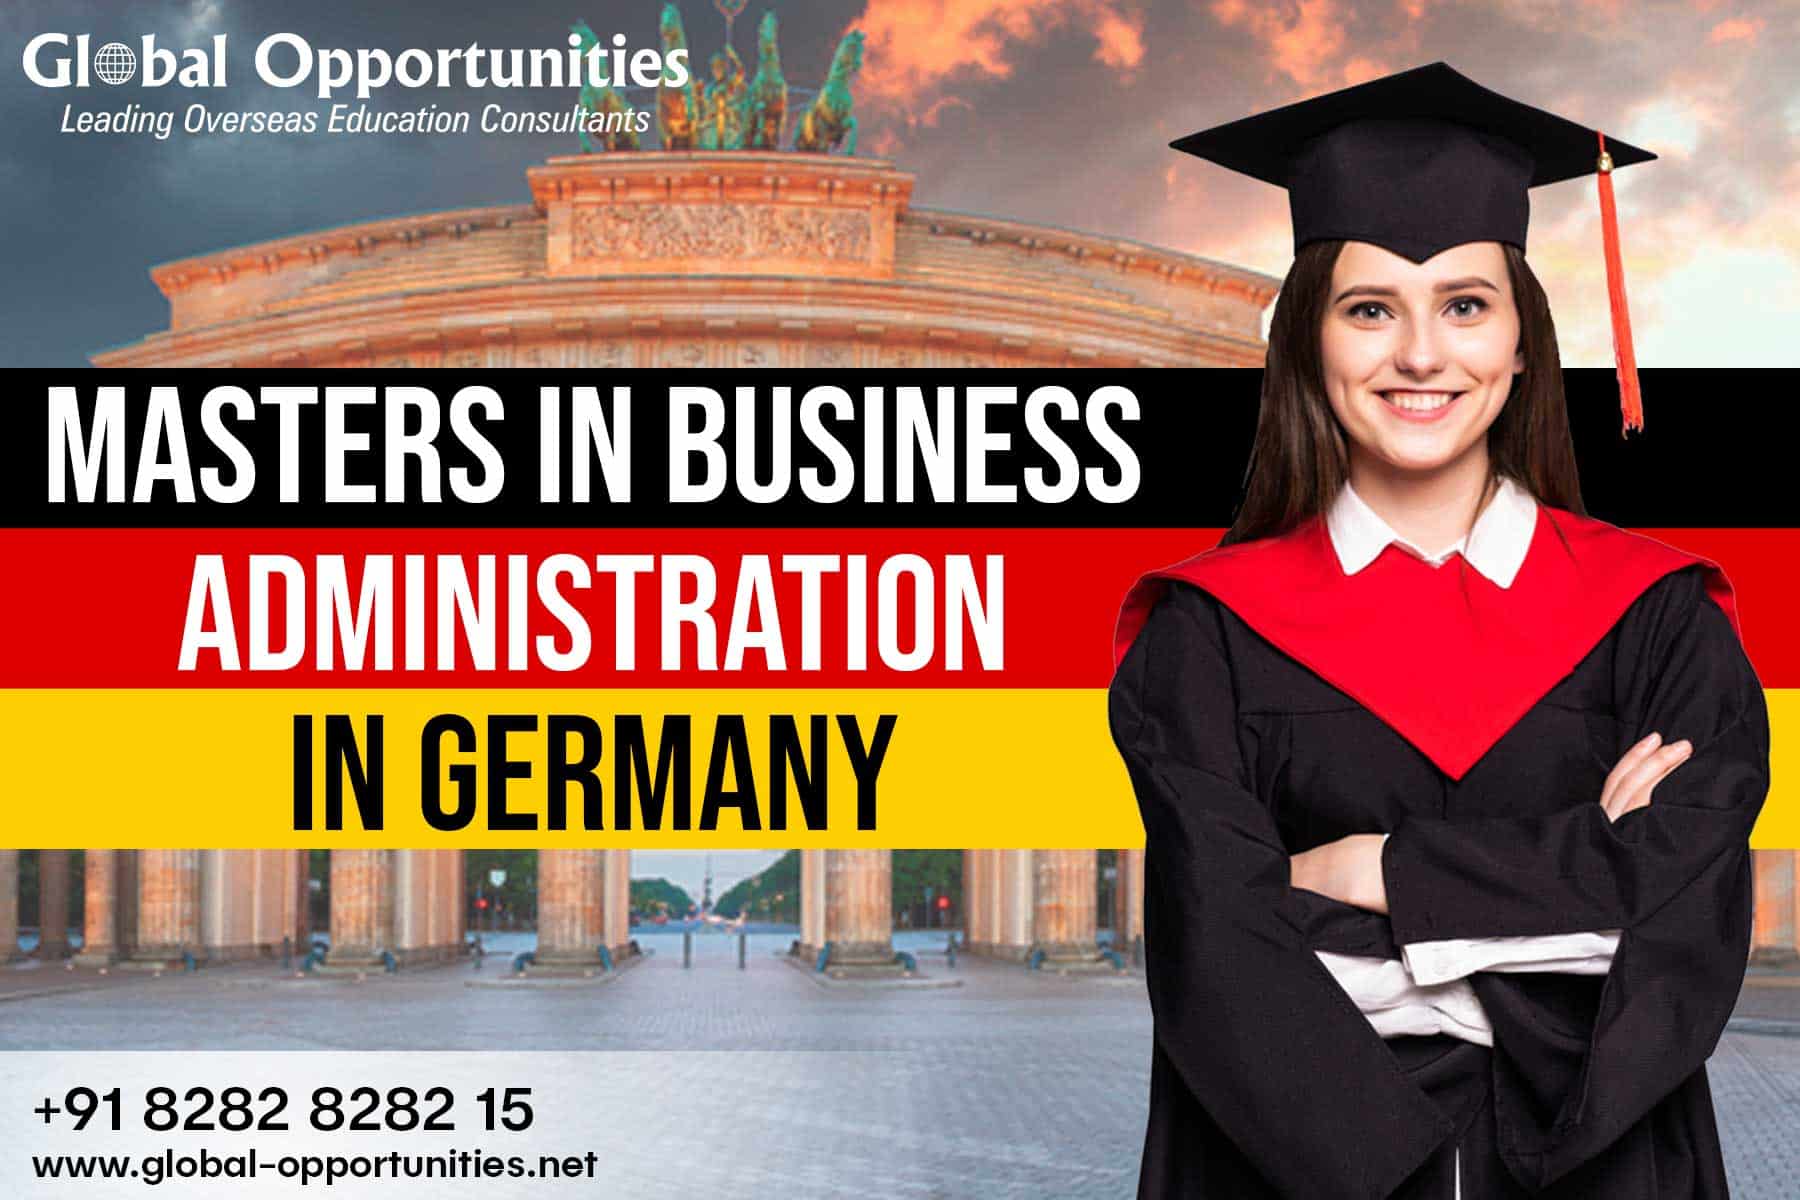 Masters in Business Administration in Germany